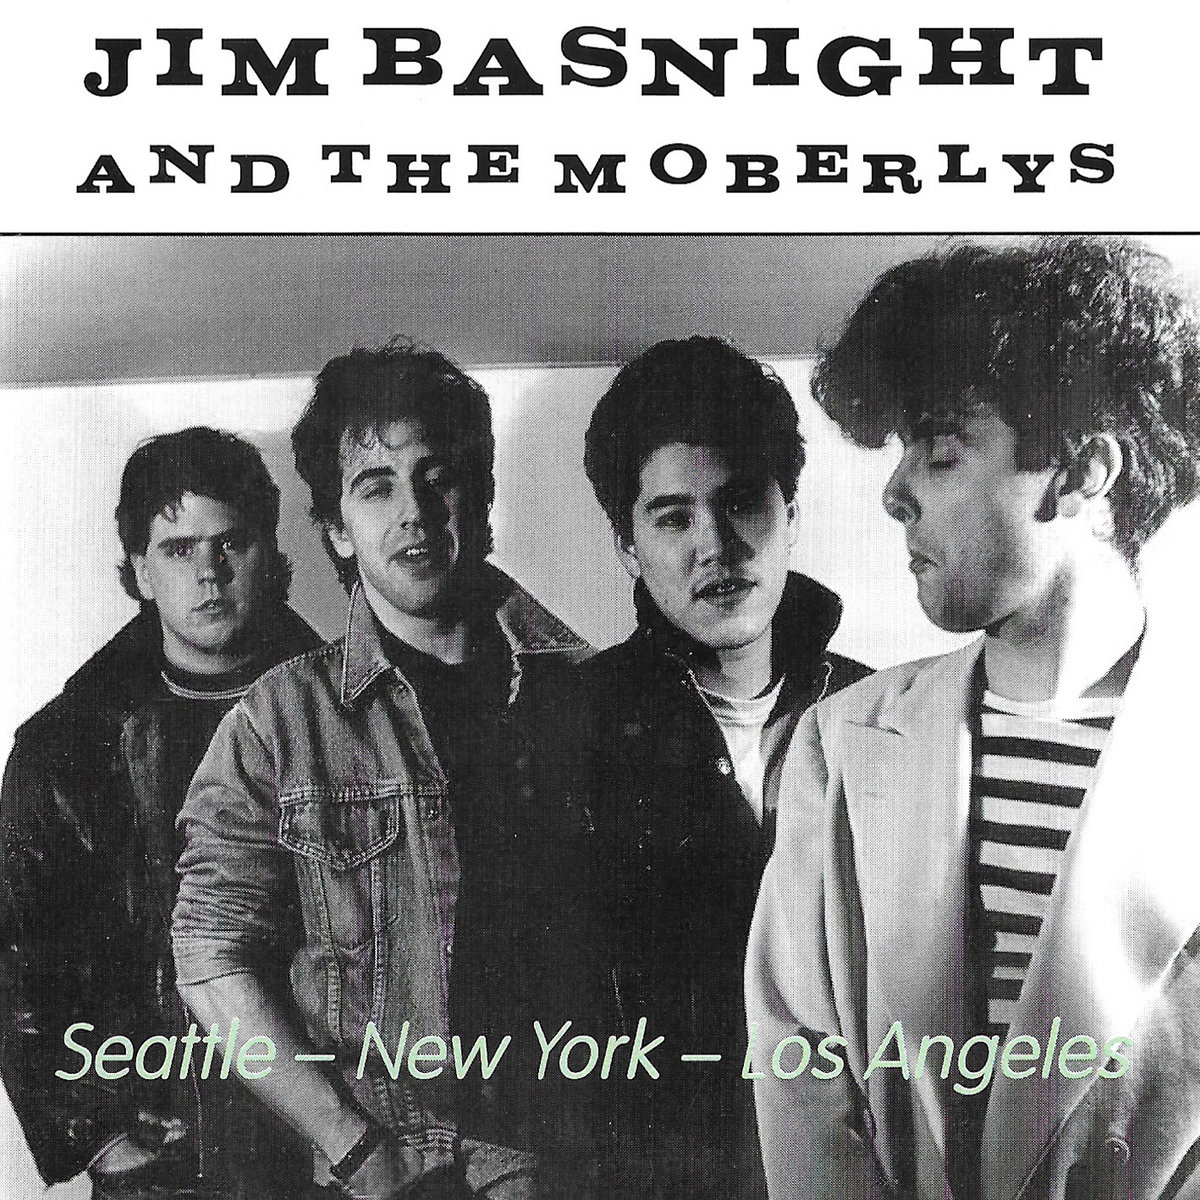 Jim Basnight and The Moberlys – Ain’t It Funny